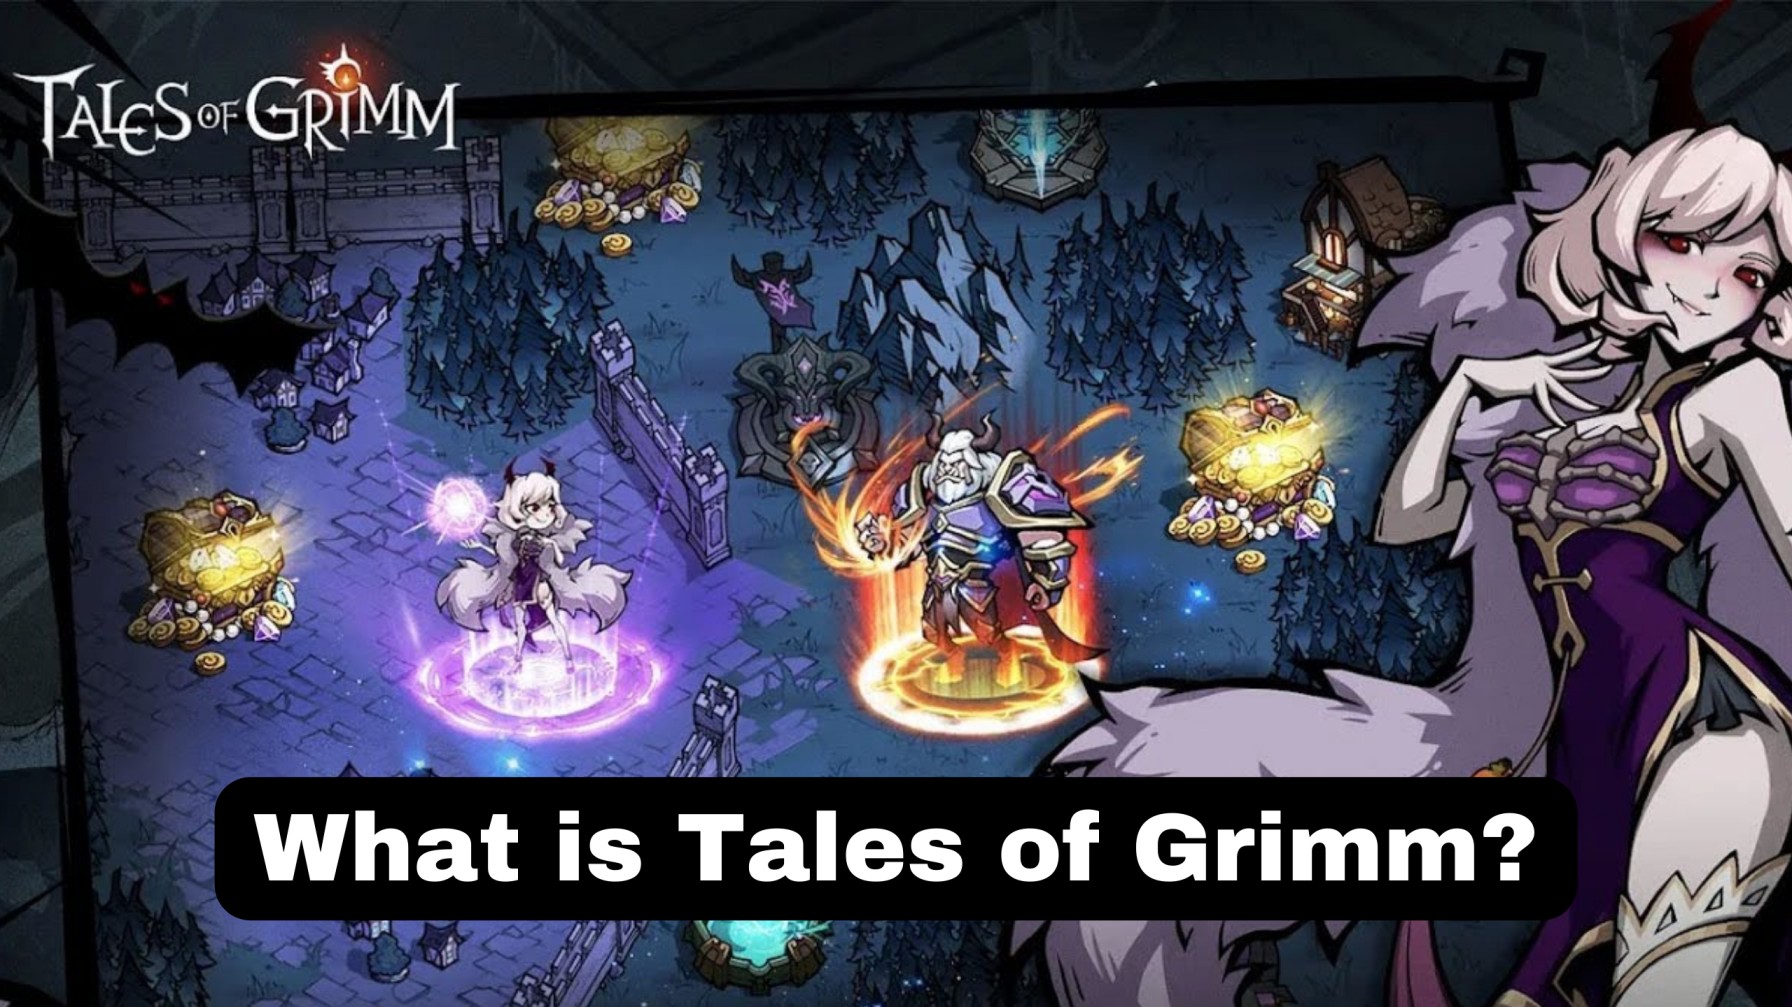 What is Tales of Grimm?